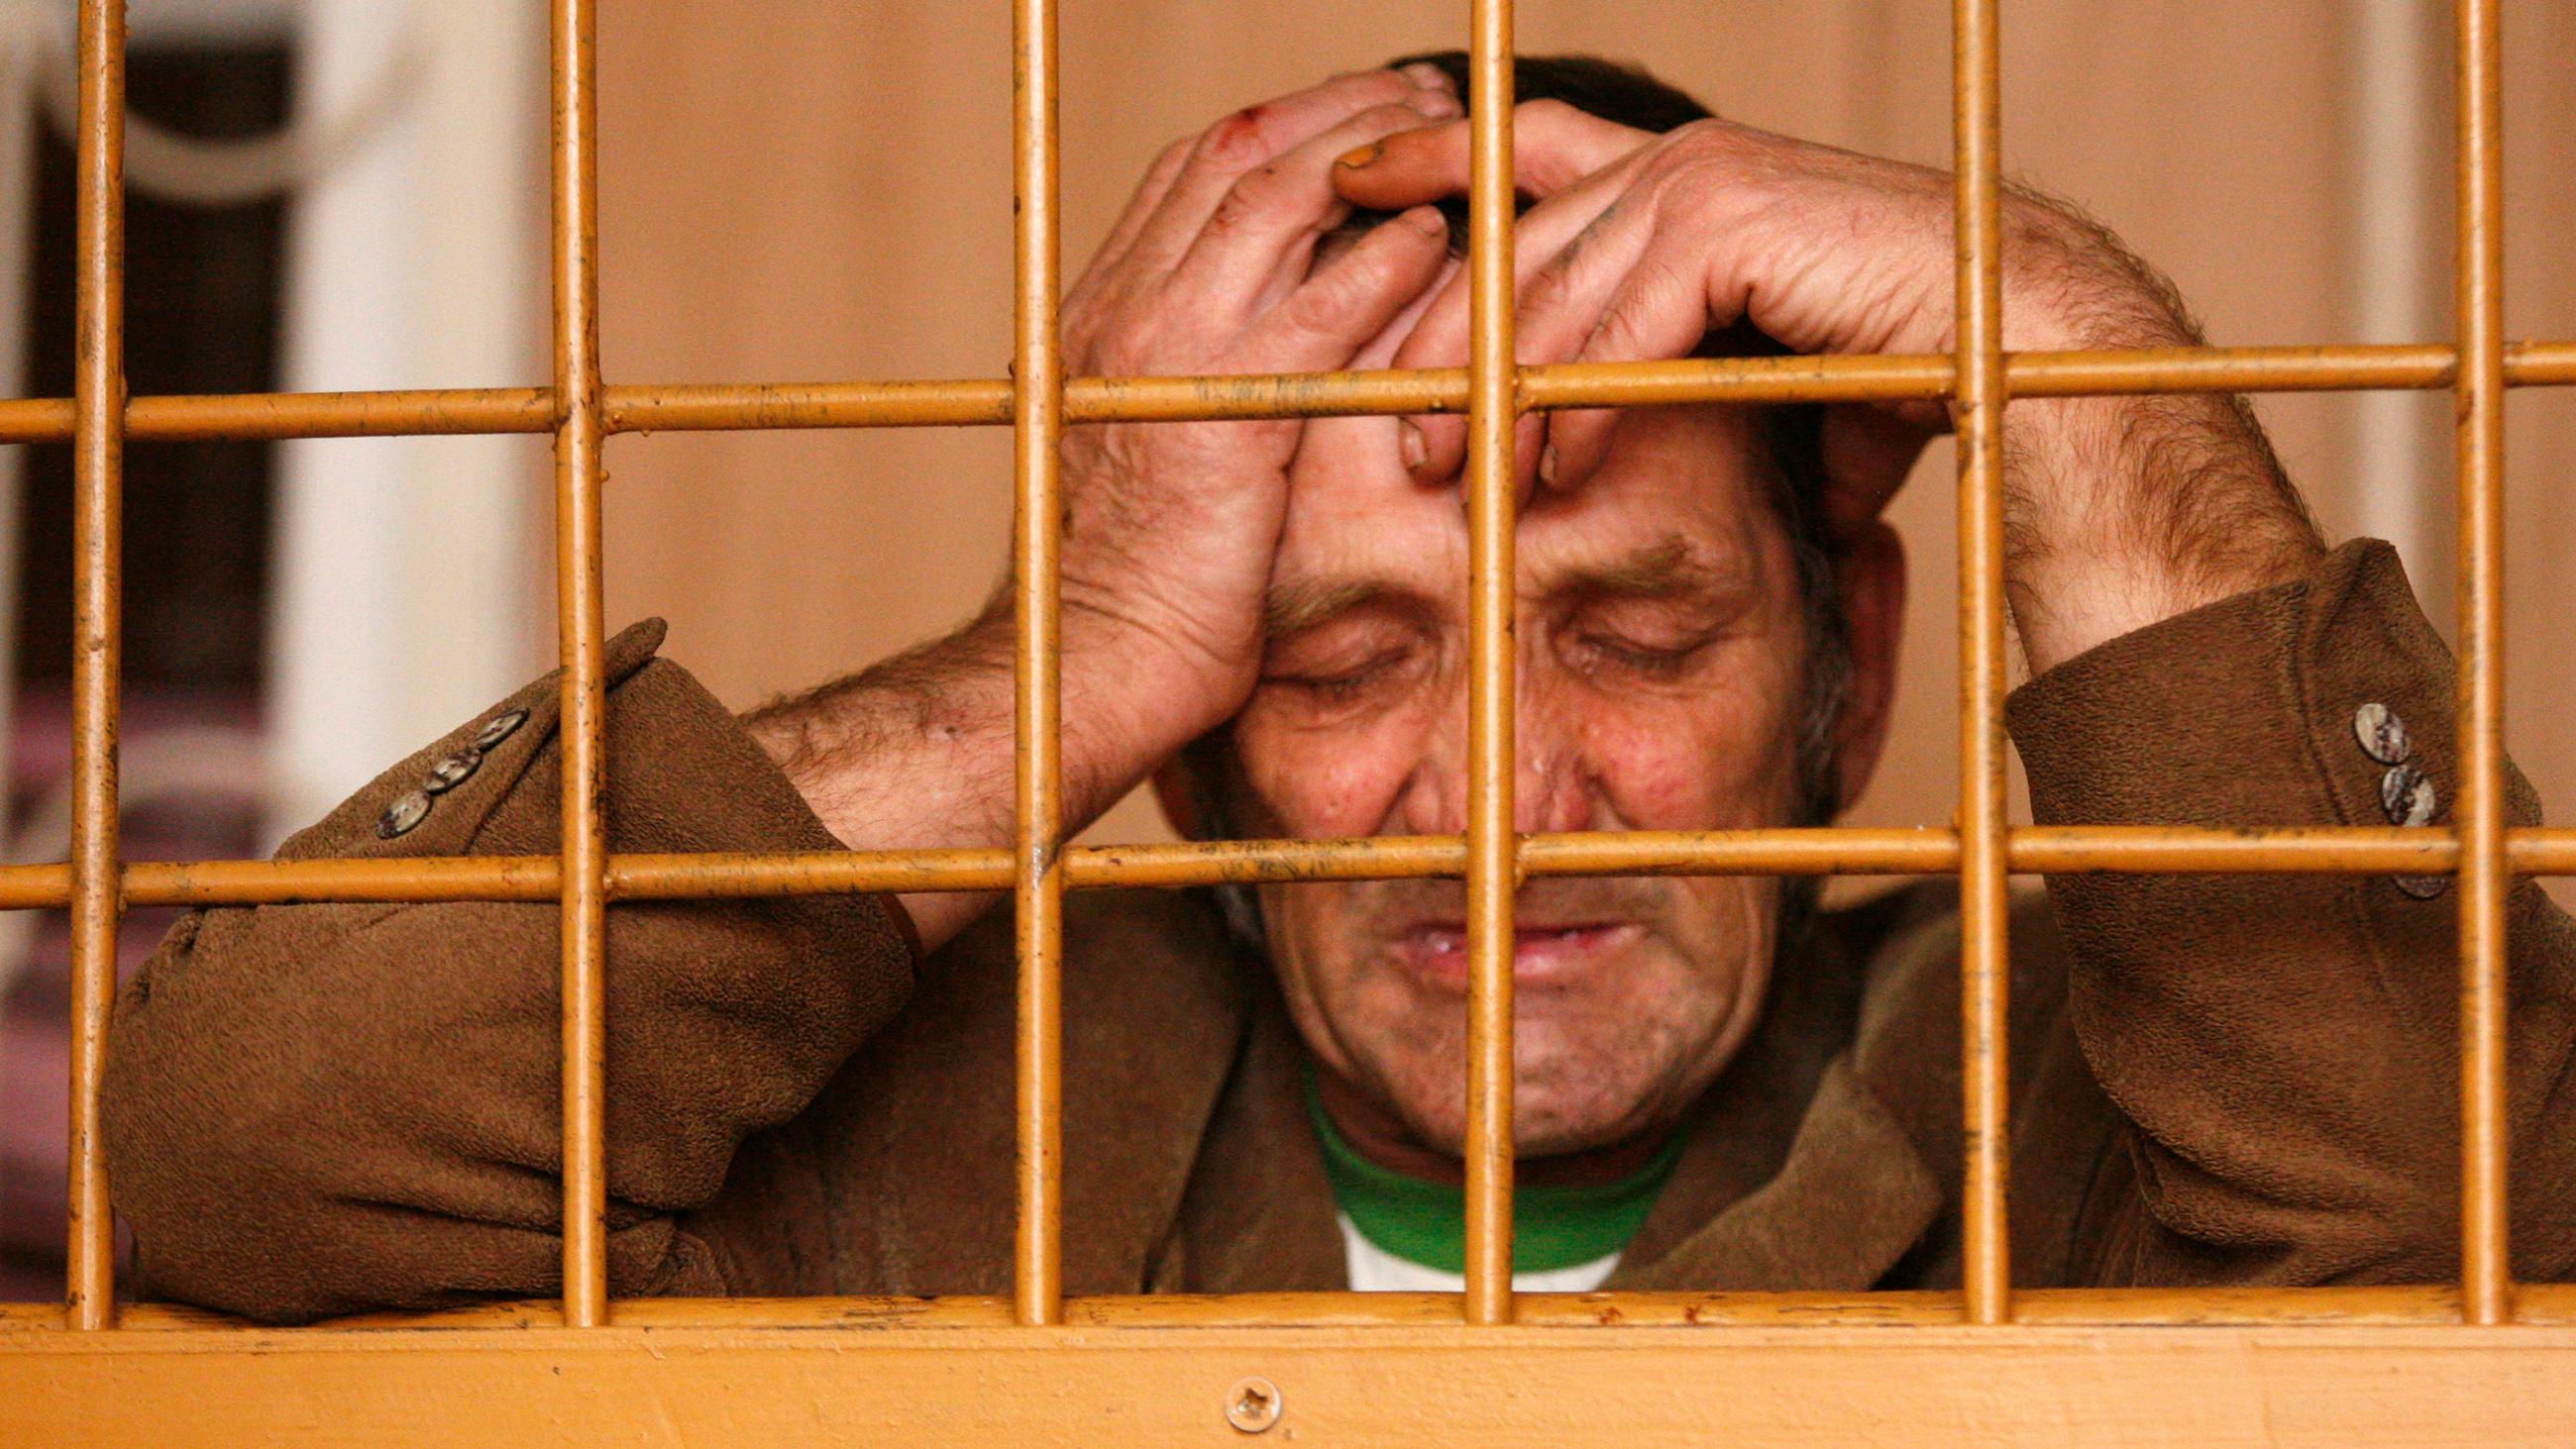 Photo shows a drunk man, 46–60 years old, eyes closed with his hand on head seen through the bars of a holding pen. 